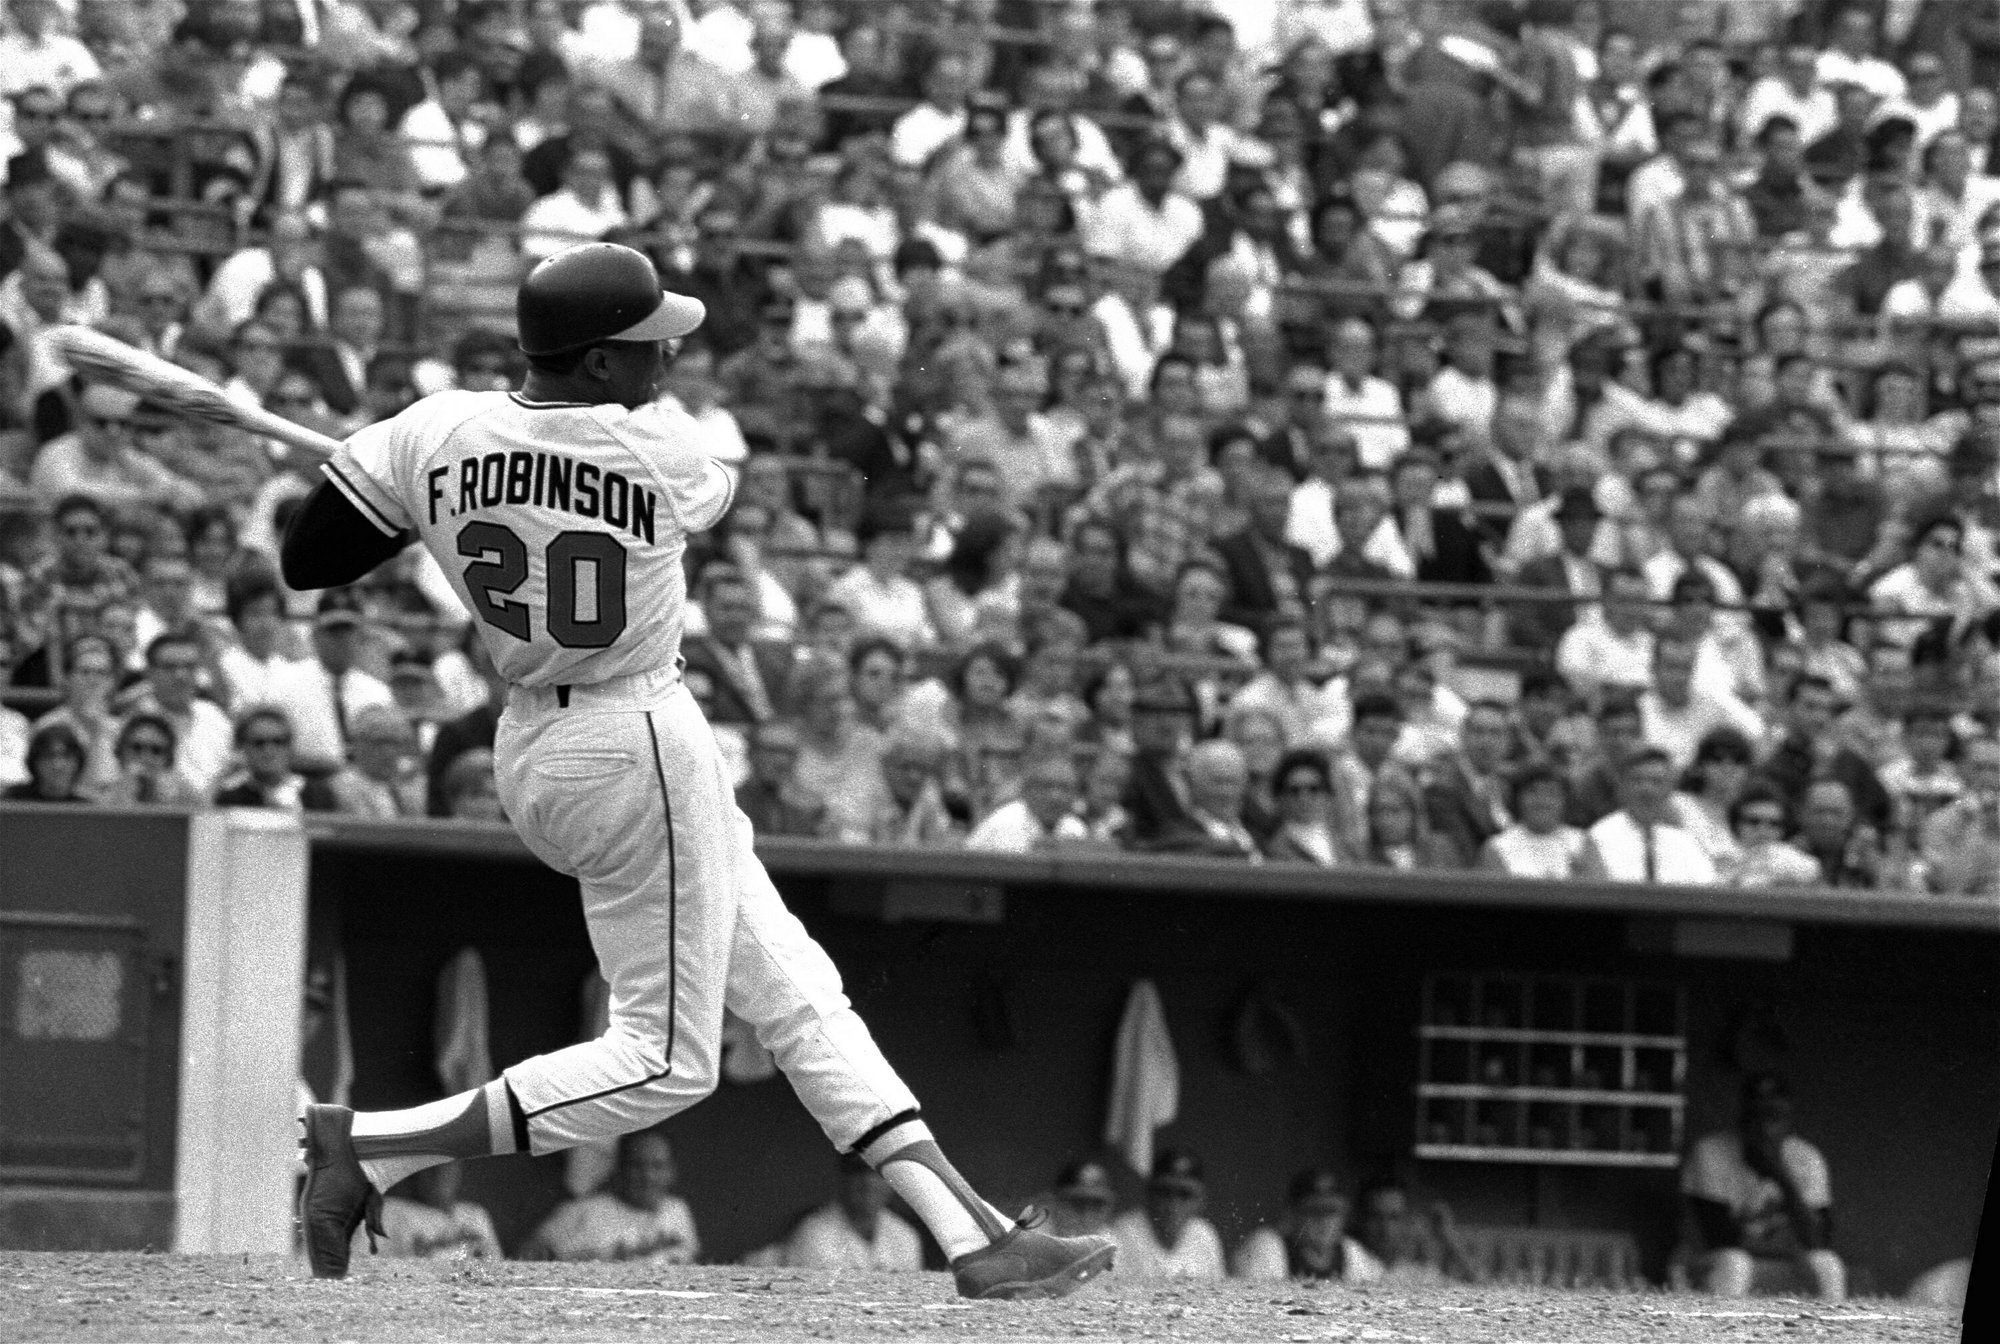 FILE -This is a May 19, 1966, file photo showing Baltimore Orioles' Frank Robinson at bat. Hall of Famer Frank Robinson, the first black manager in Major League Baseball and the only player to win the MVP award in both leagues, has died. He was 83. Robinson had been in hospice care at his home in Bel Air. MLB confirmed his death Thursday, Feb. 7, 2019.(AP Photo/File)